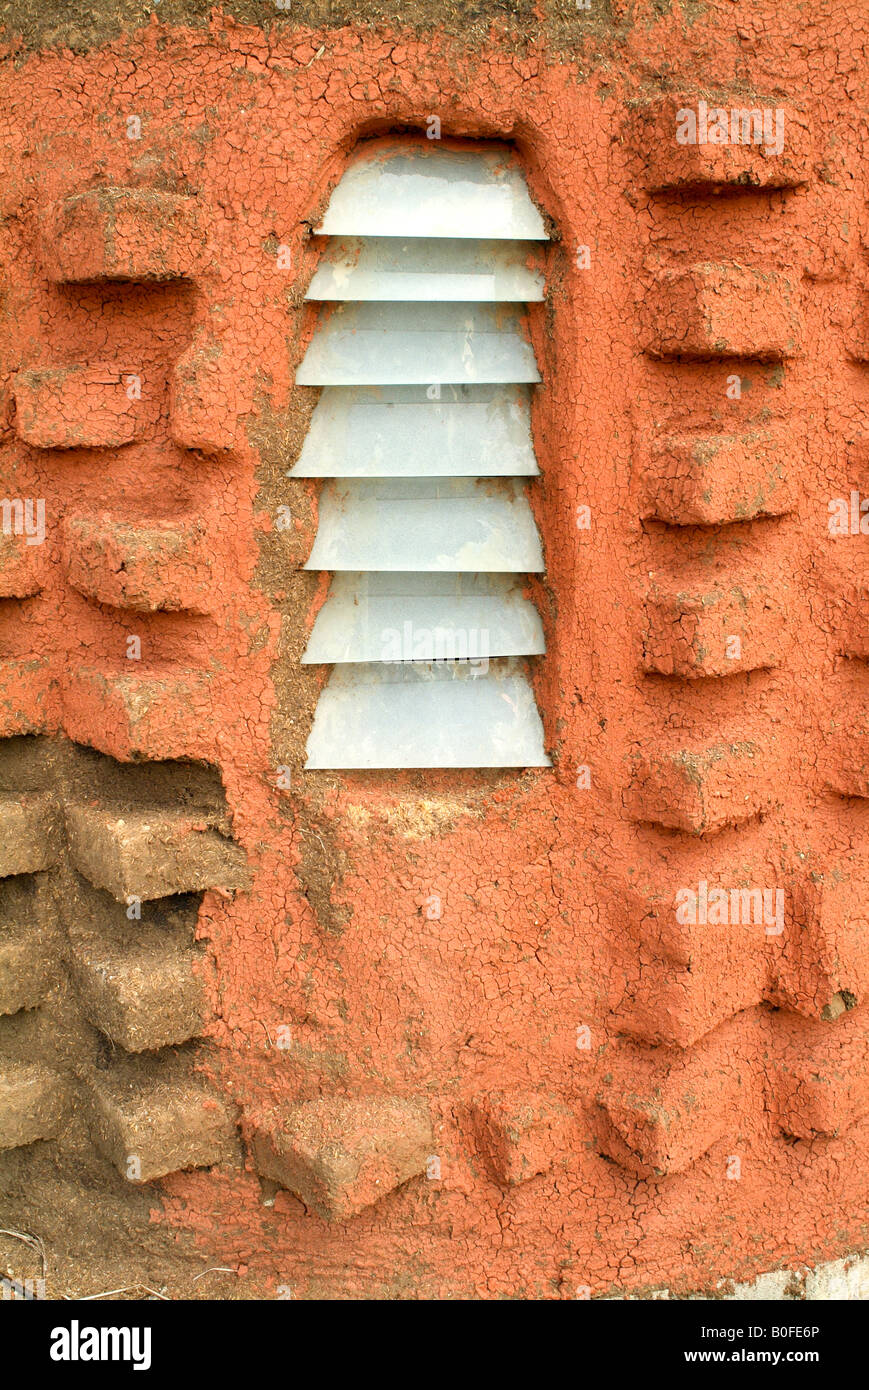 The window of a home made of natural materials in Asia - brick, rice husks and natural dyes. Stock Photo